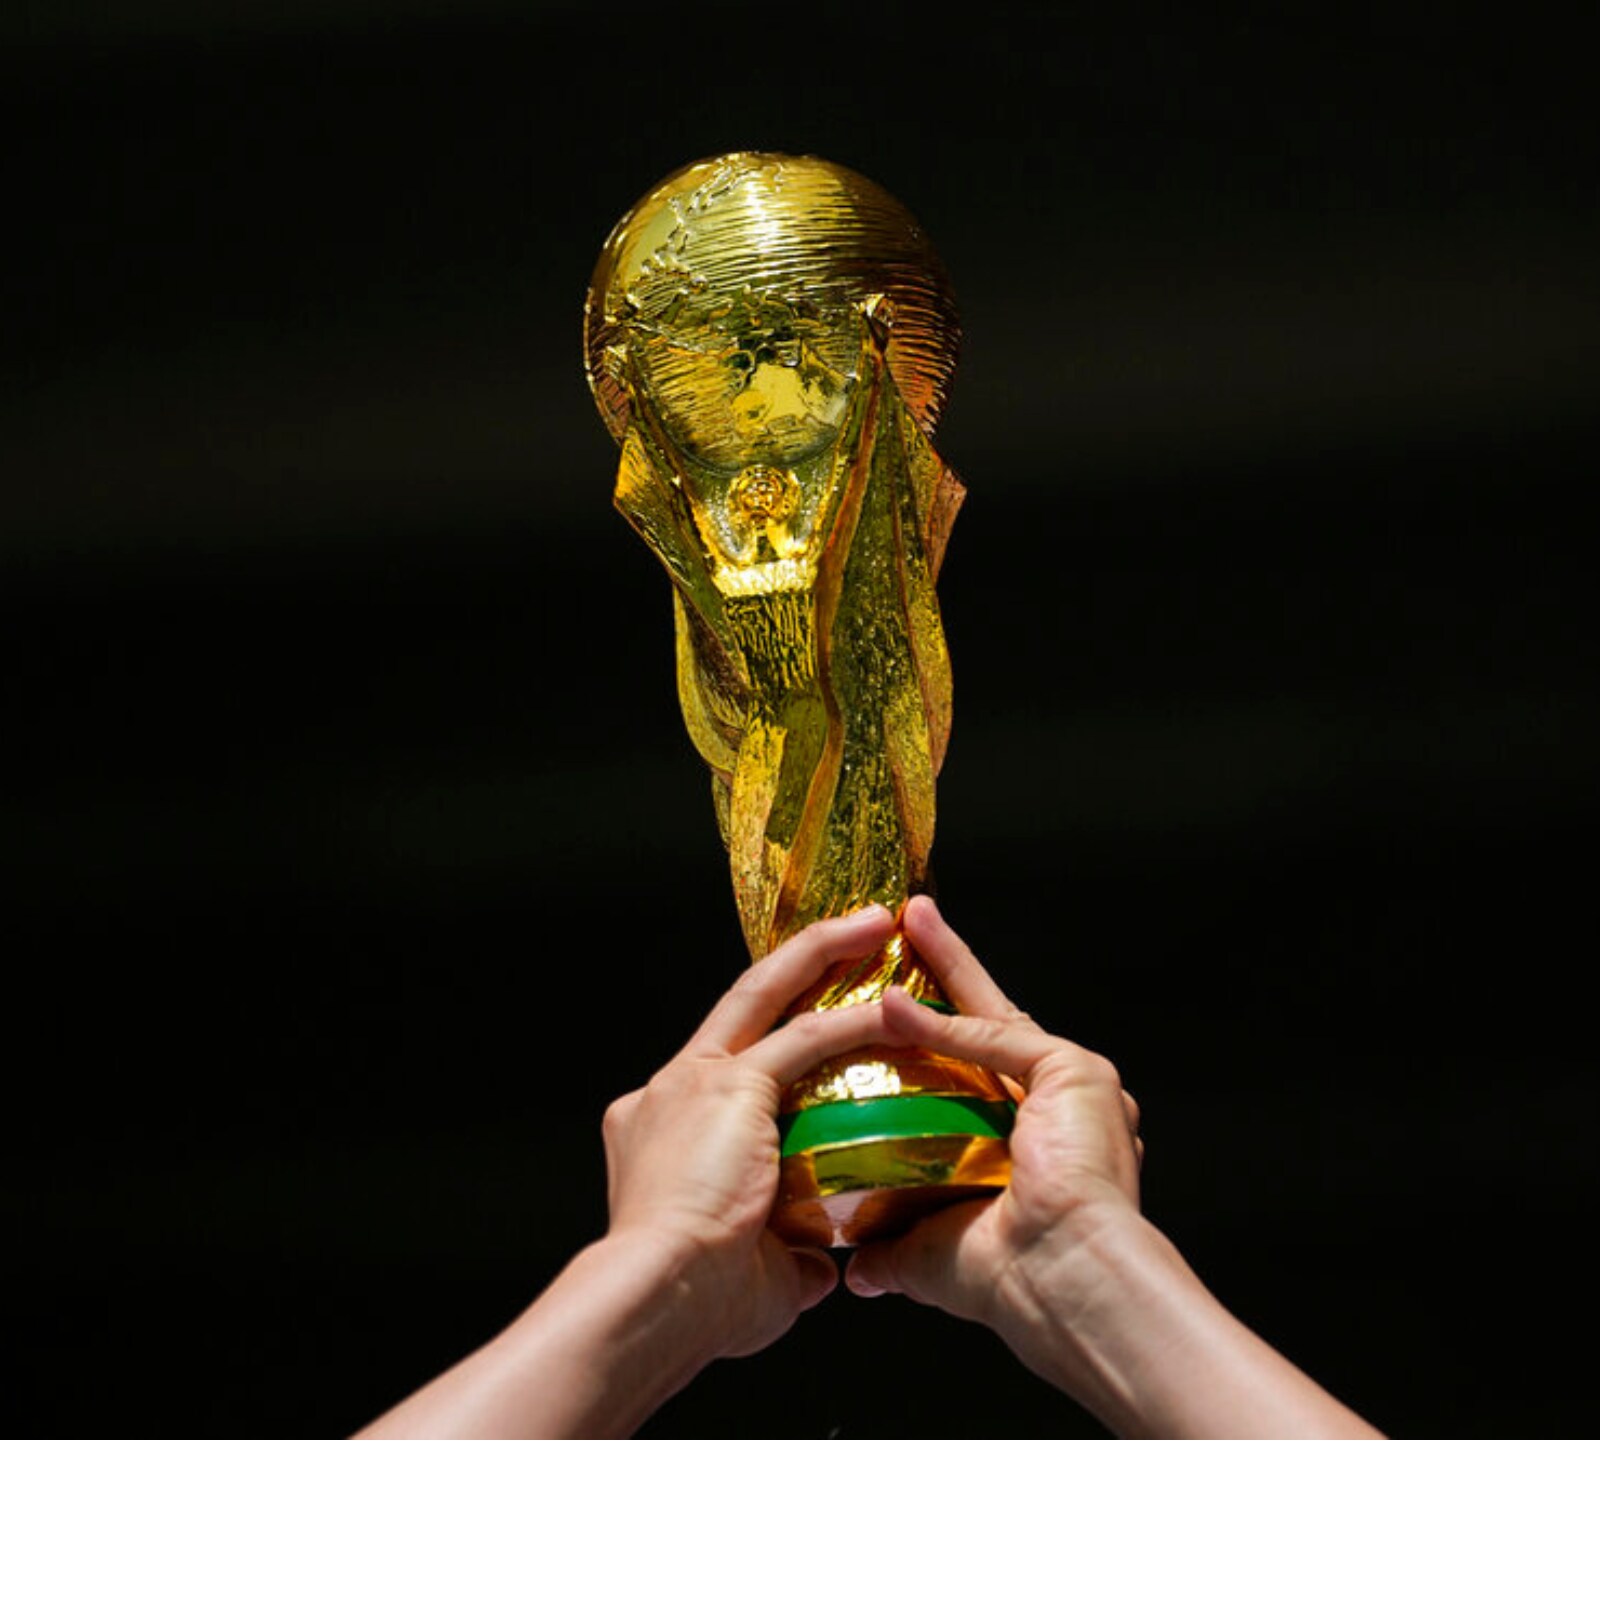 FIFA World Cup Qatar 2022: World Cup Group Stage Pairings - News18